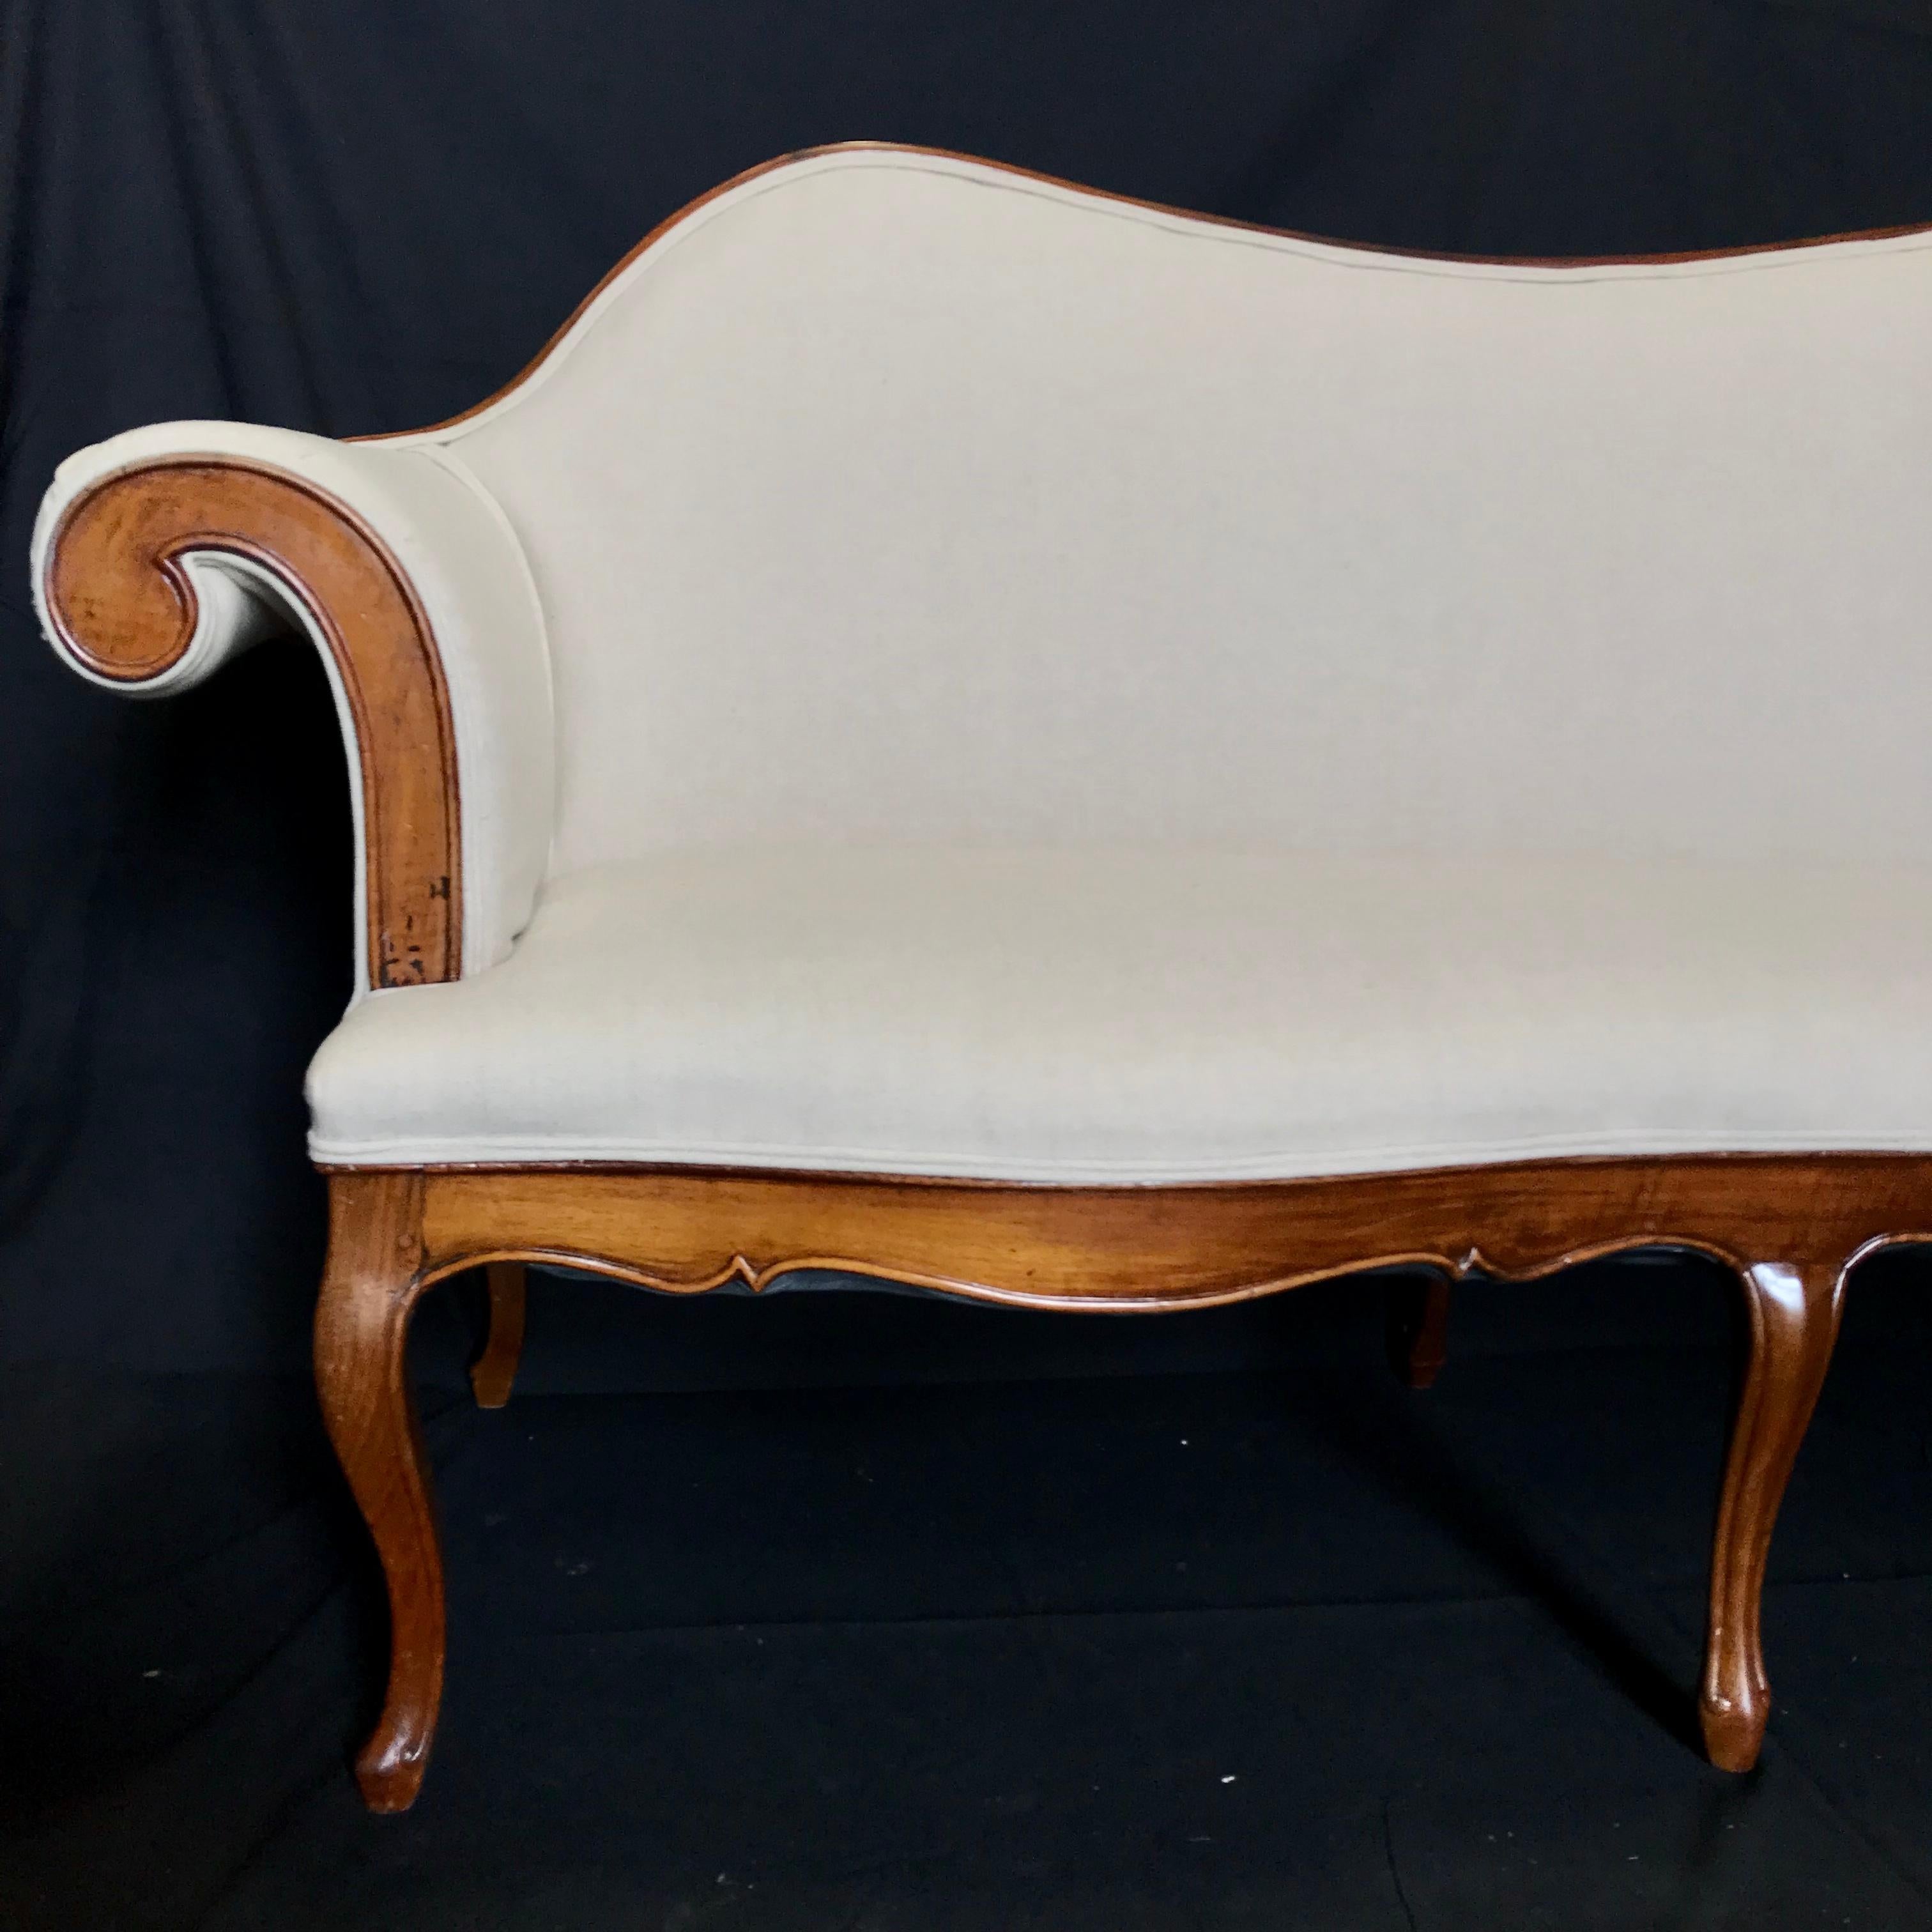 A sleek glamorous Louis XV style 19th century walnut loveseat having Beidermeieresque curved arms and fresh new French cotton linen upholstery. 
#5747
Measures